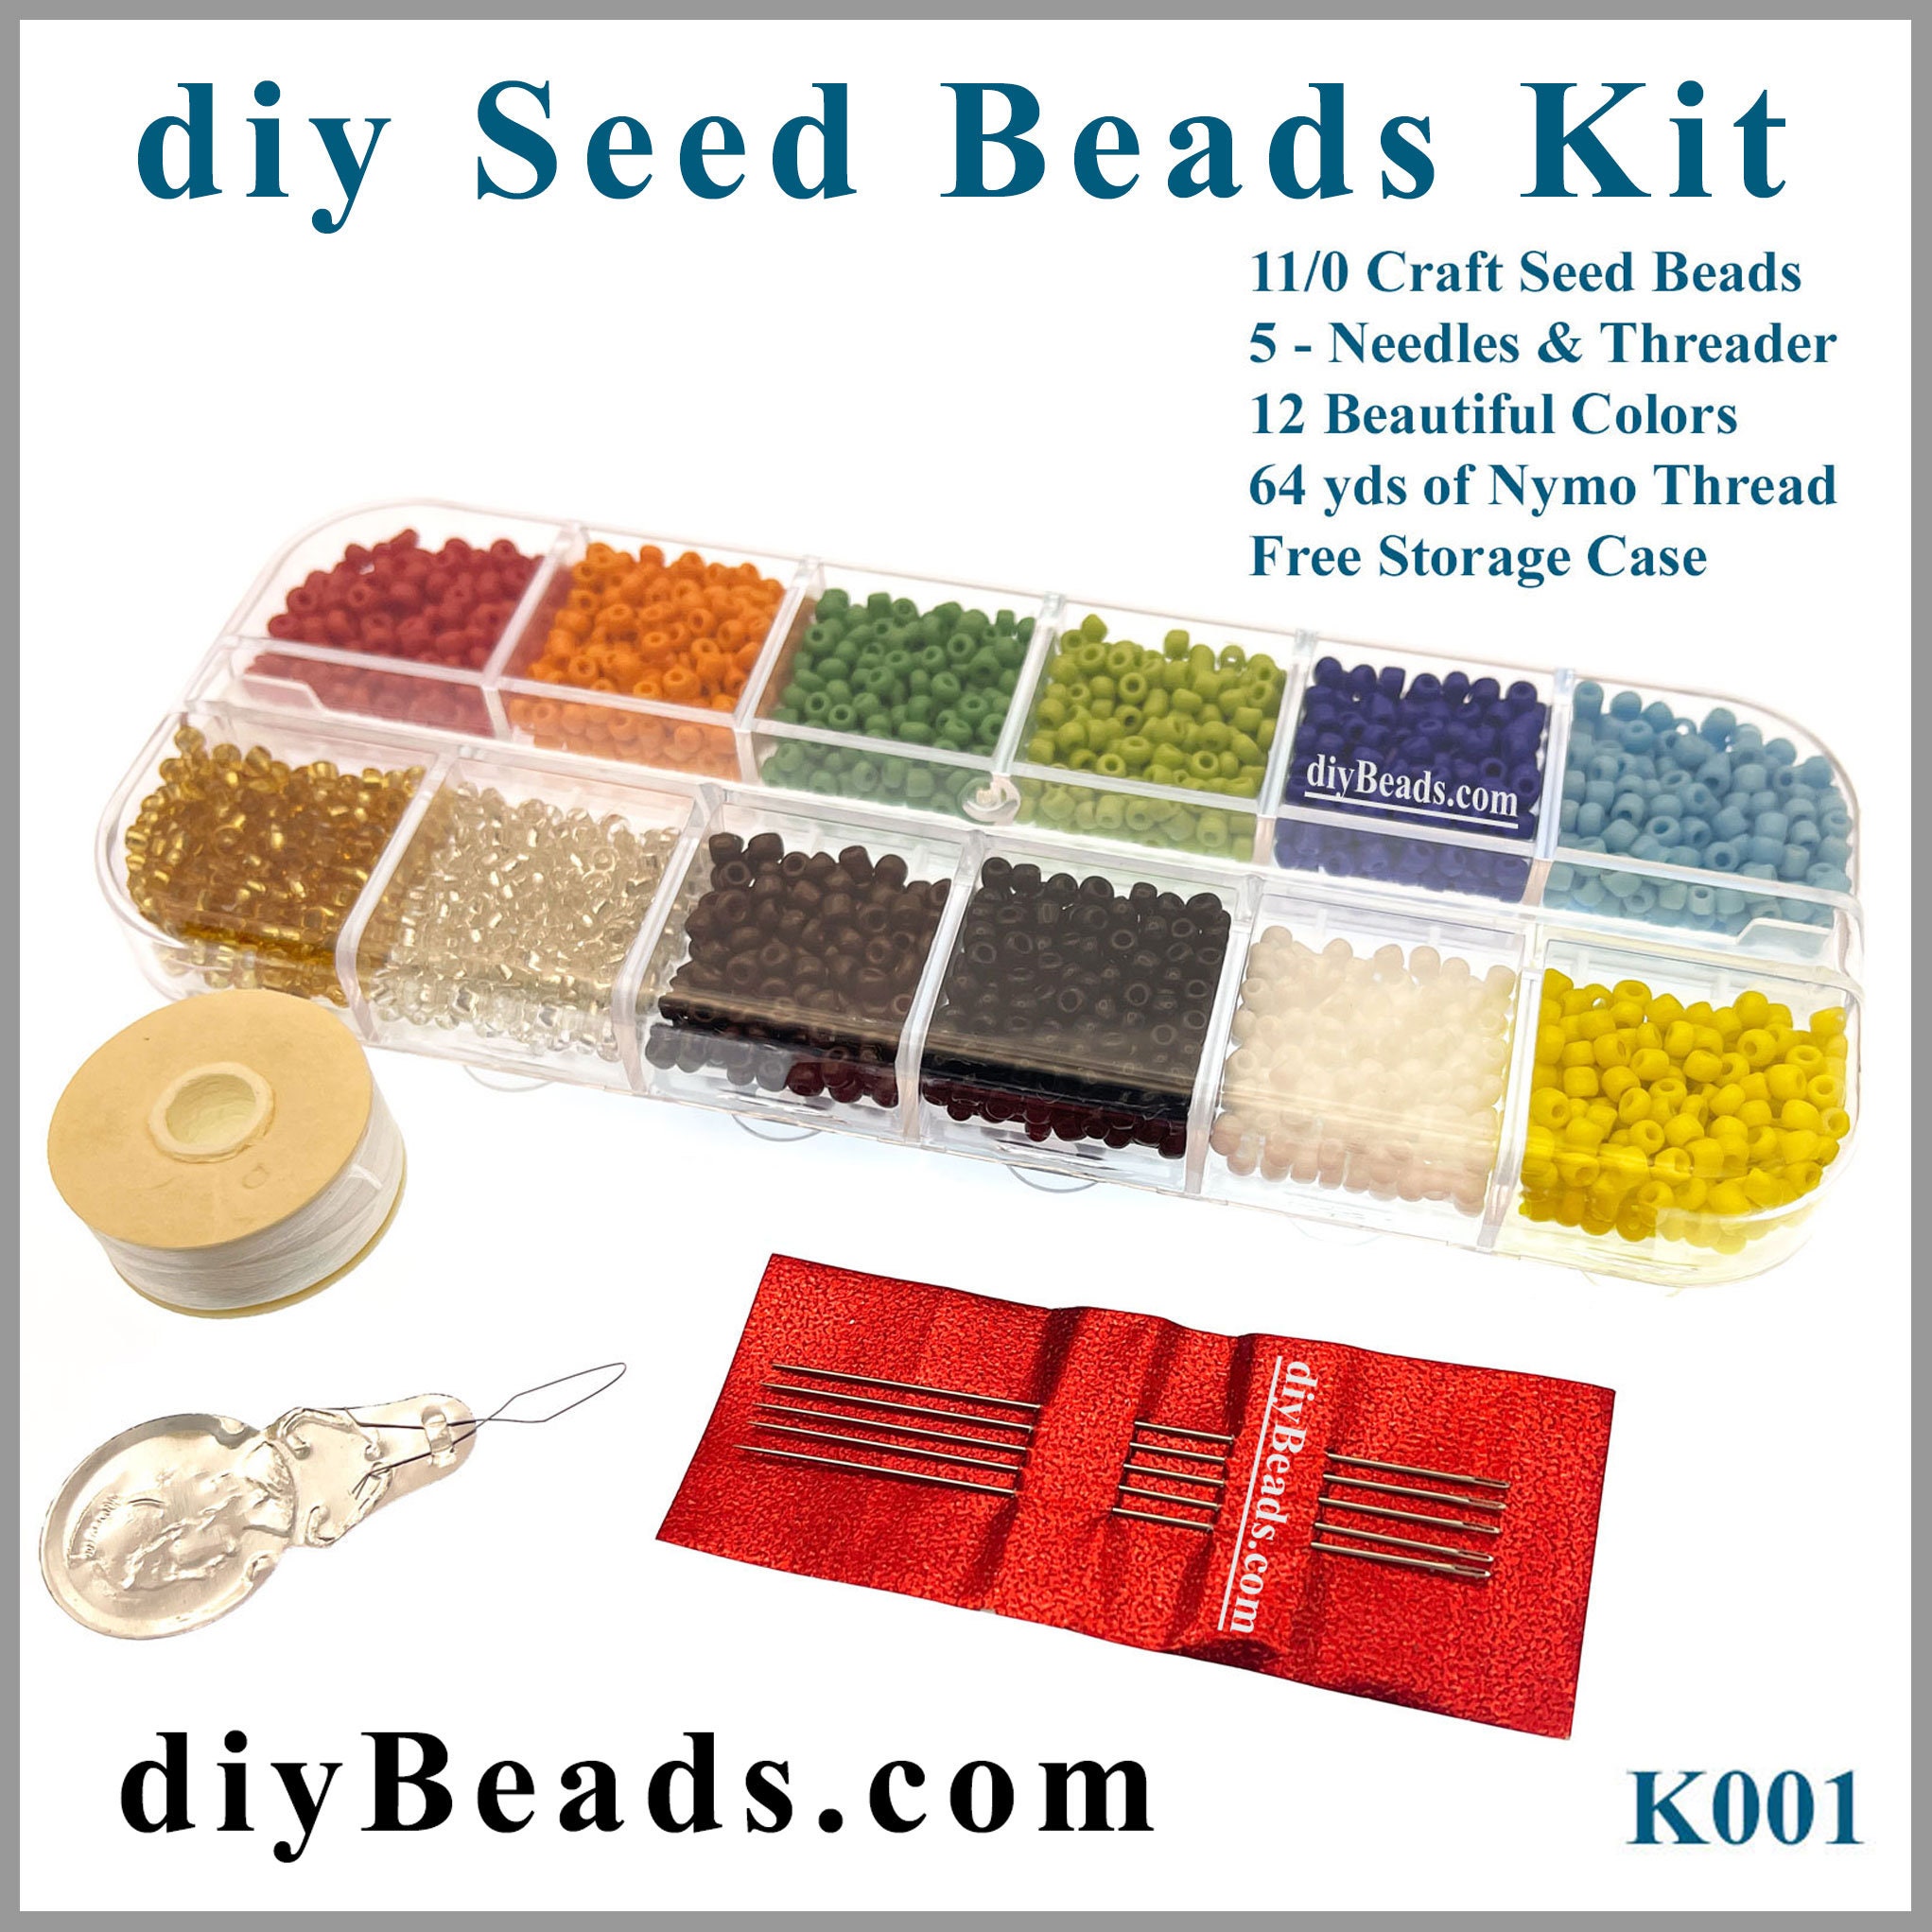 Big Eye Curved Beading Needles, Sold in Packages of 1 TO 50 Needles for Use  With a Bead Spinner 3.5 Inches Diybeads 